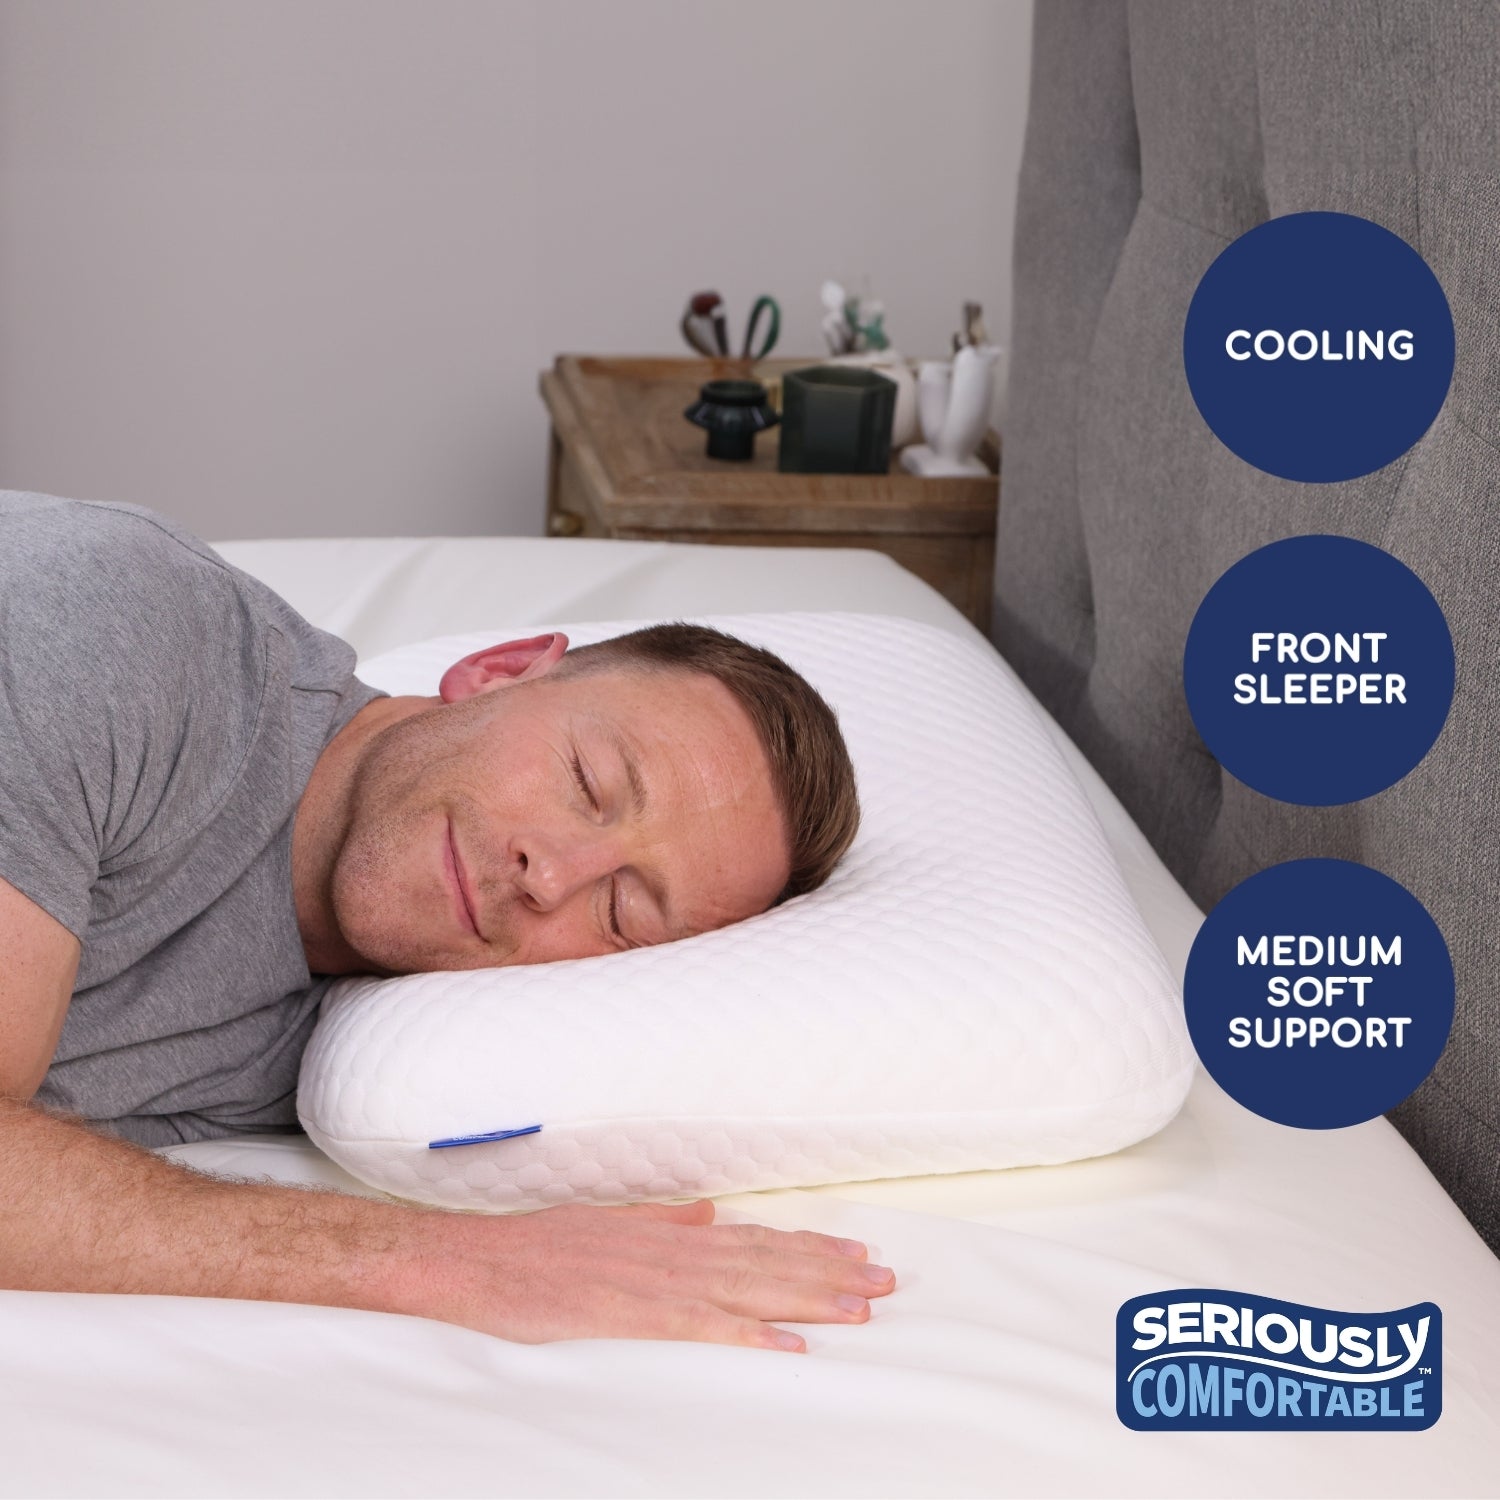 Seriously Comfortable	Cool Memory Comfort Front Sleeper Pillow